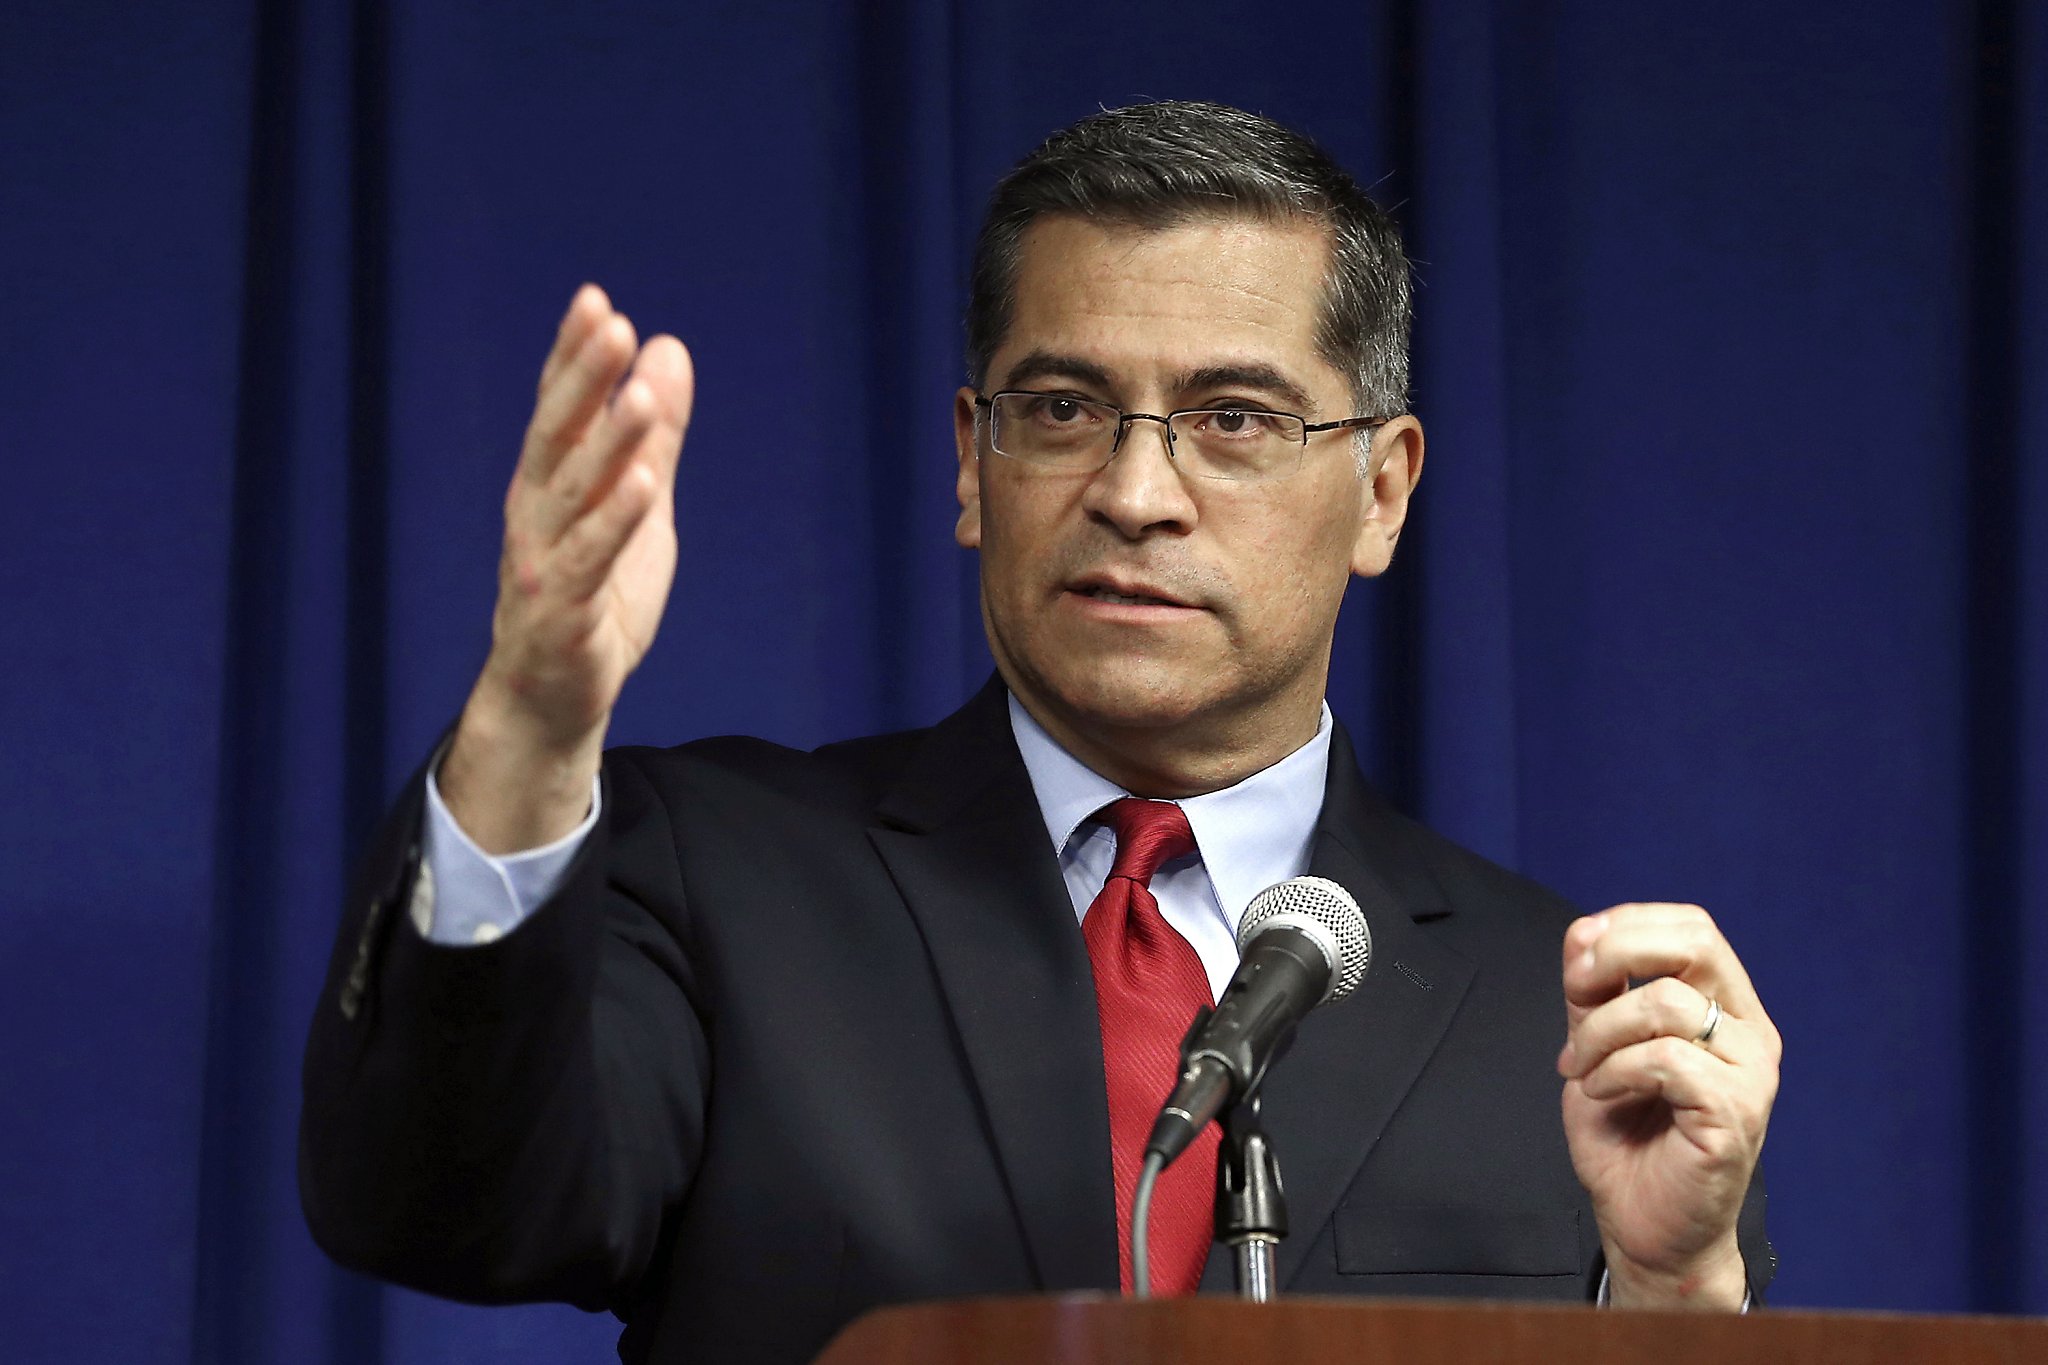 HHS Secretary Becerra will be a champion for whistleblowers